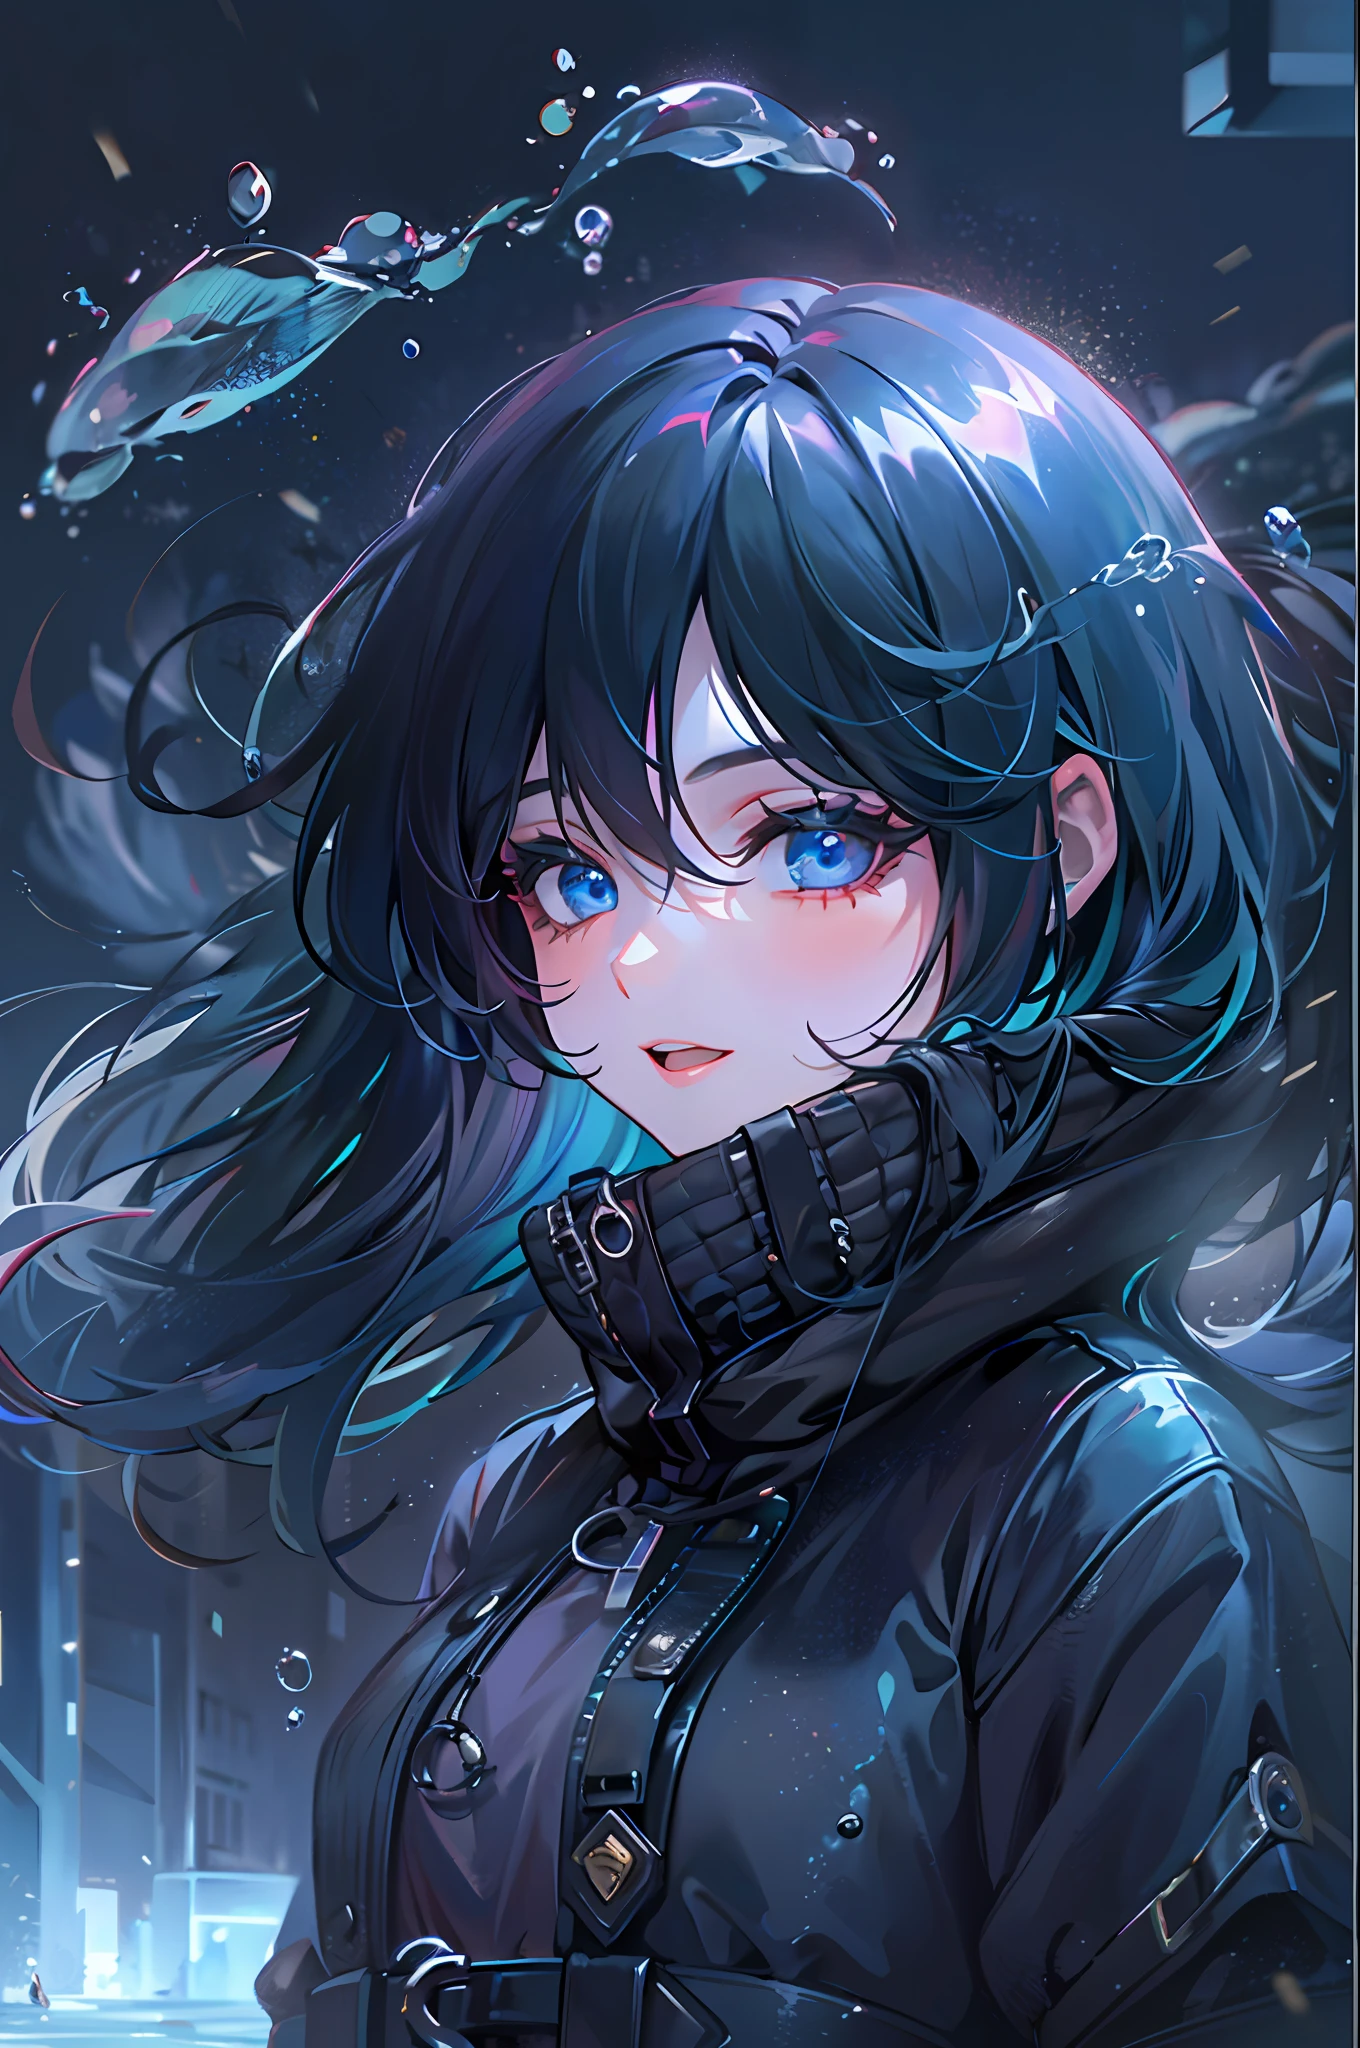 ((top-quality)), ((​masterpiece)), ((Ultra-detail)), (extremely delicate and beautiful), girl with, solo, cold attitude,((Black jacket)),She is very(relax)with  the(Settled down)Looks,A darK-haired, depth of fields,evil smile,Bubble, under the water, Air bubble,bright light blue eyes,Inner color with black hair and light blue tips,Cold background,Bob Hair,a miniskirt,tight skirts